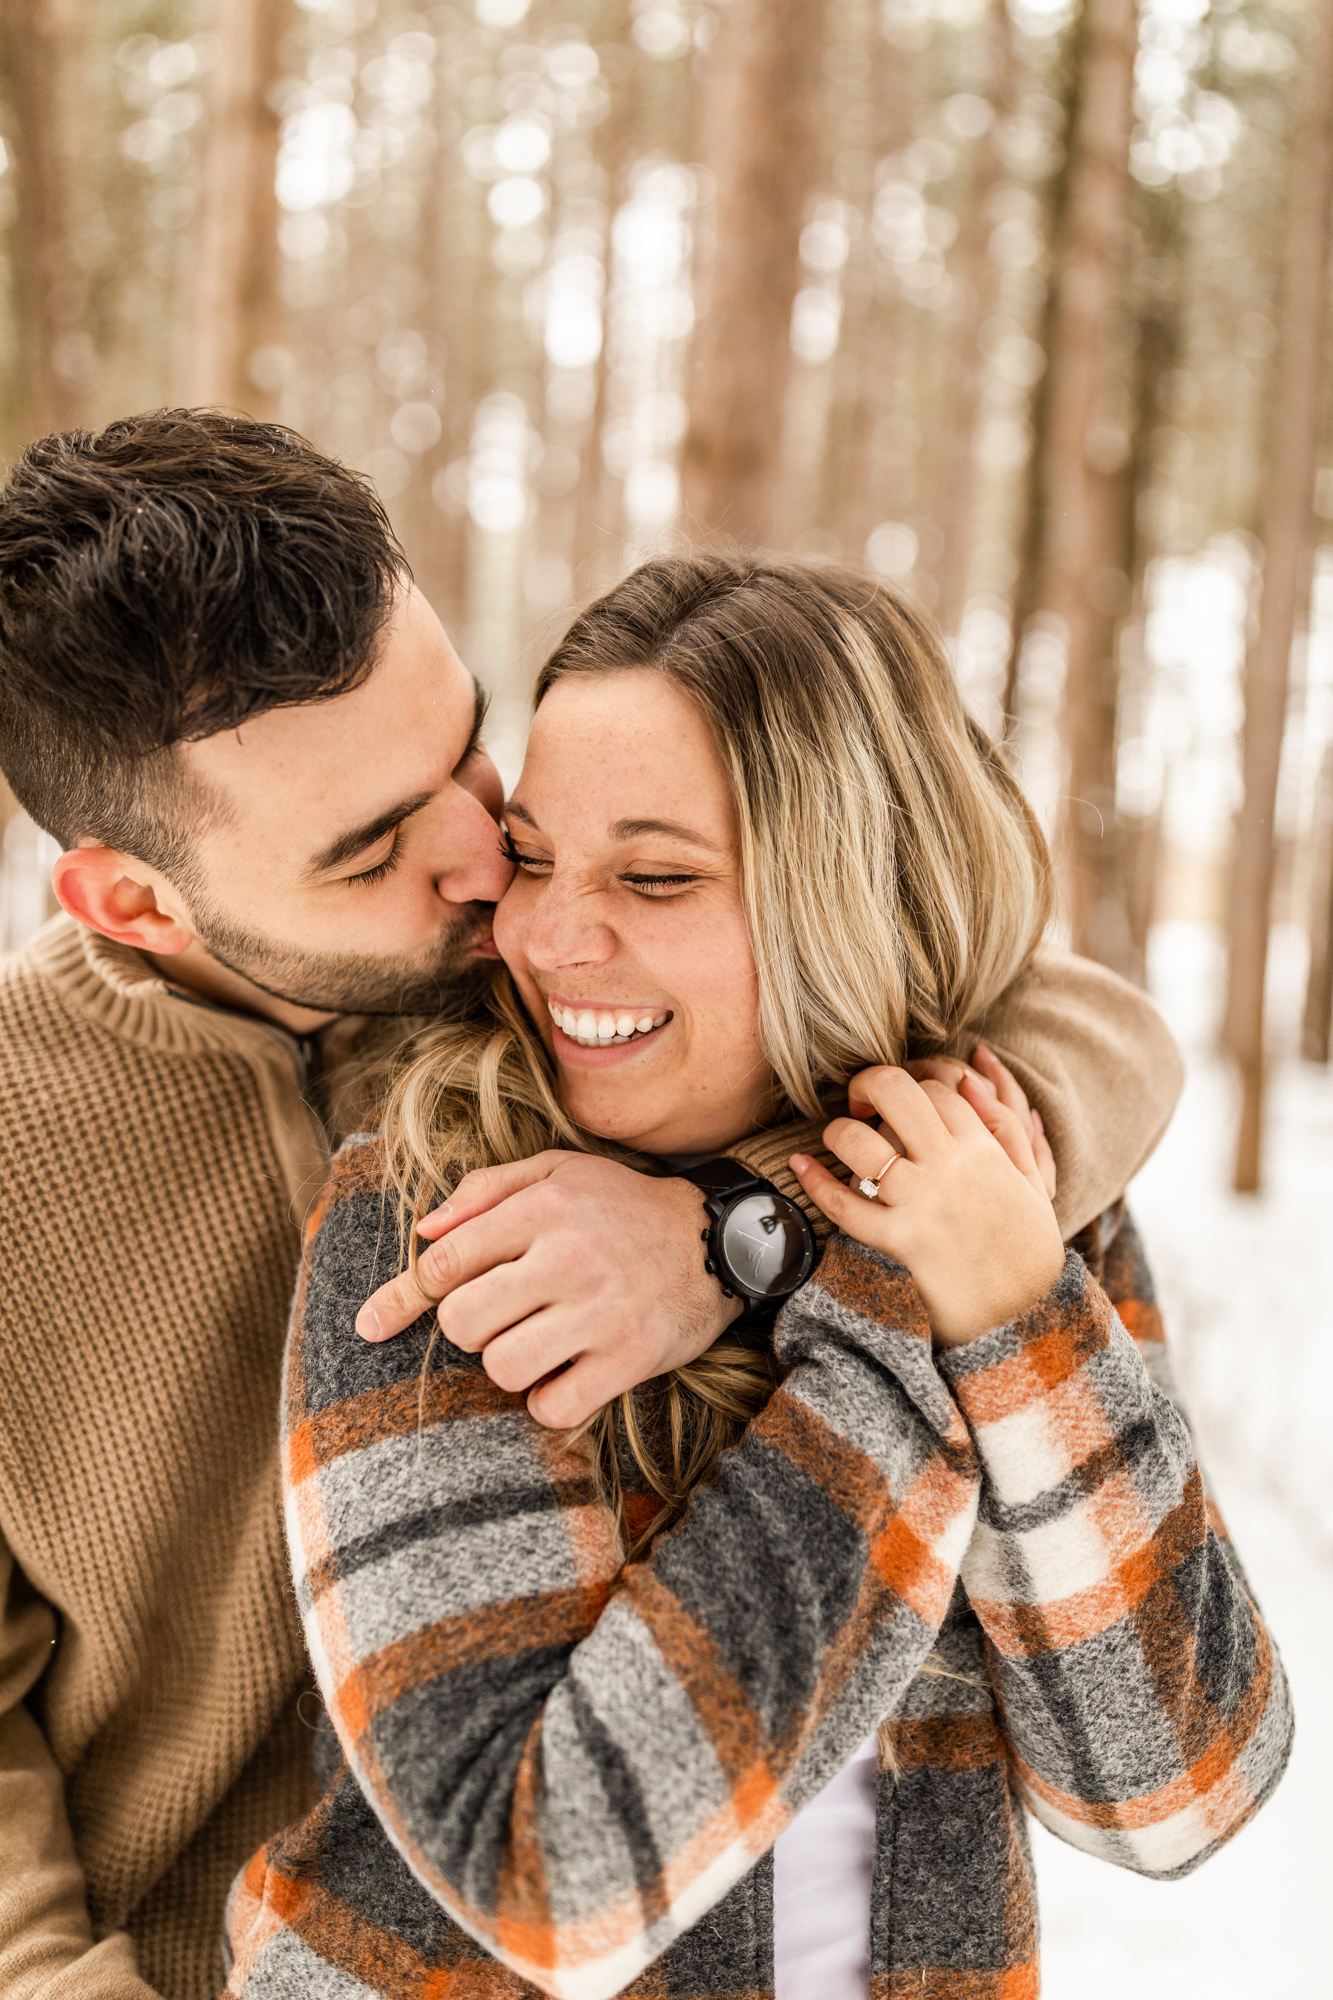 man kissing woman on cheek in snowy forest in Michigan